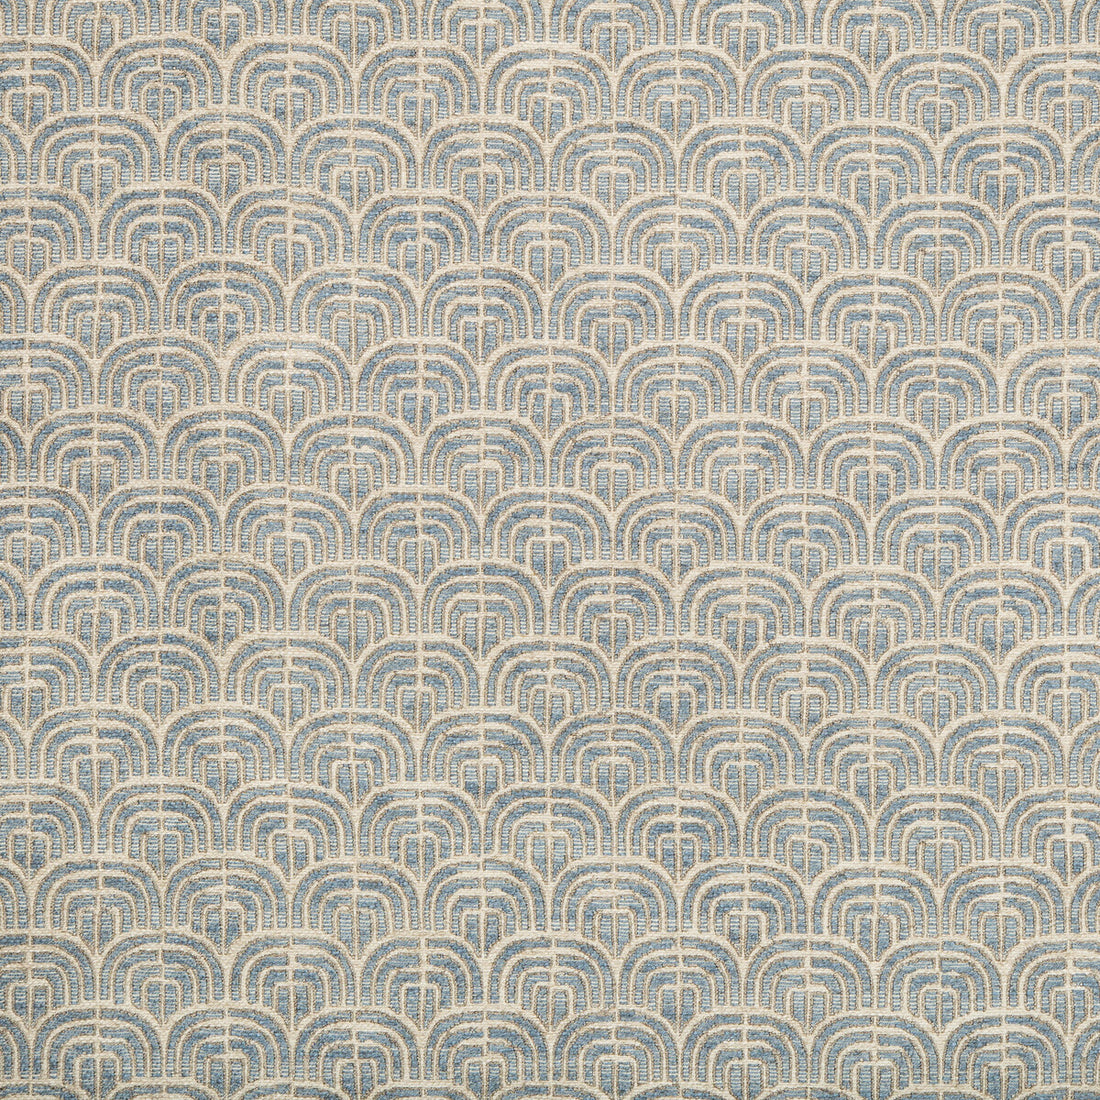 Bale fabric in denim color - pattern 2019155.5.0 - by Lee Jofa in the Carrier And Company collection